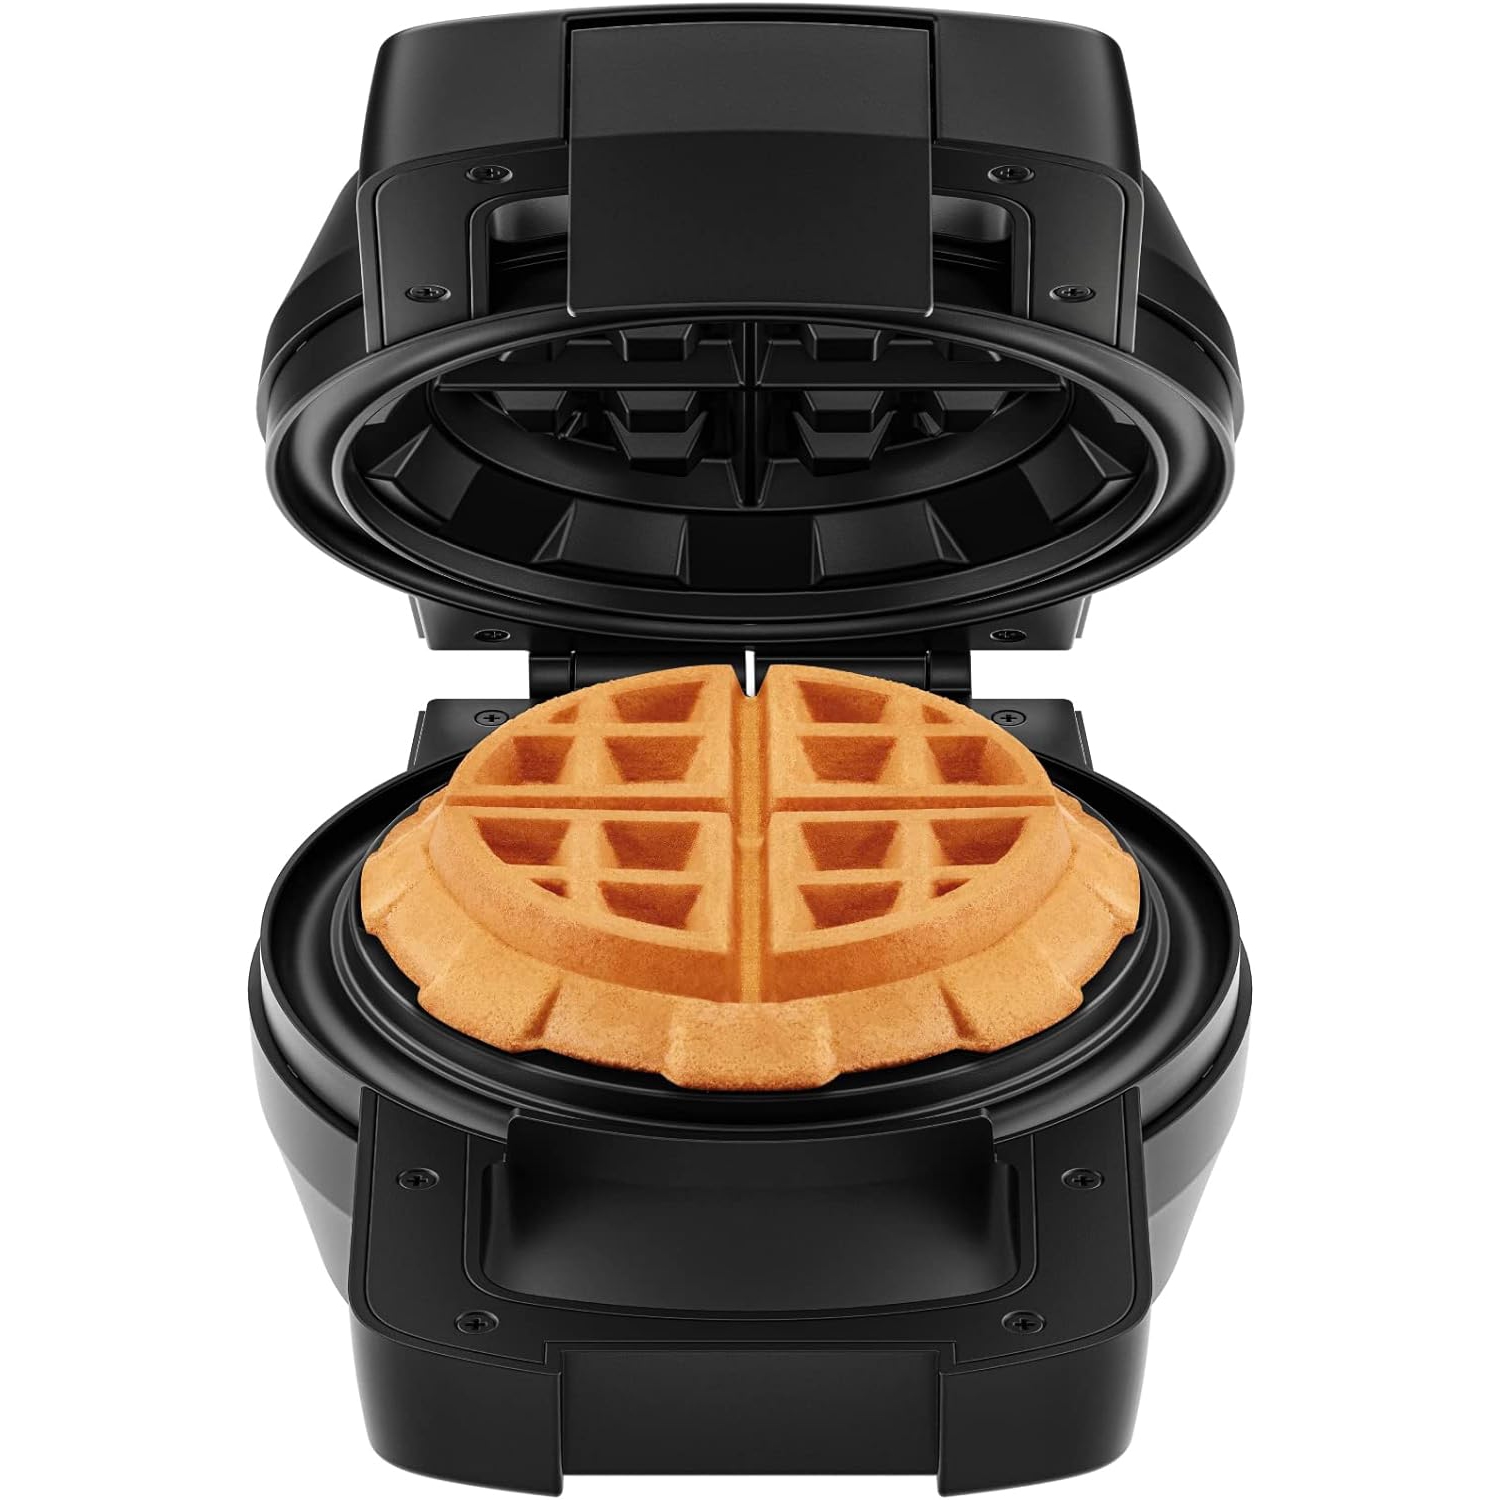 Chefman Big Stuff, Belgian Deep Stuffed Waffle Maker, Mess-Free Moat, 5-Inch Diameter with Dual-Sided Heating Plates, Wide Wrap with Locking Lid, Pour Light Indicator, Cool-Touch H